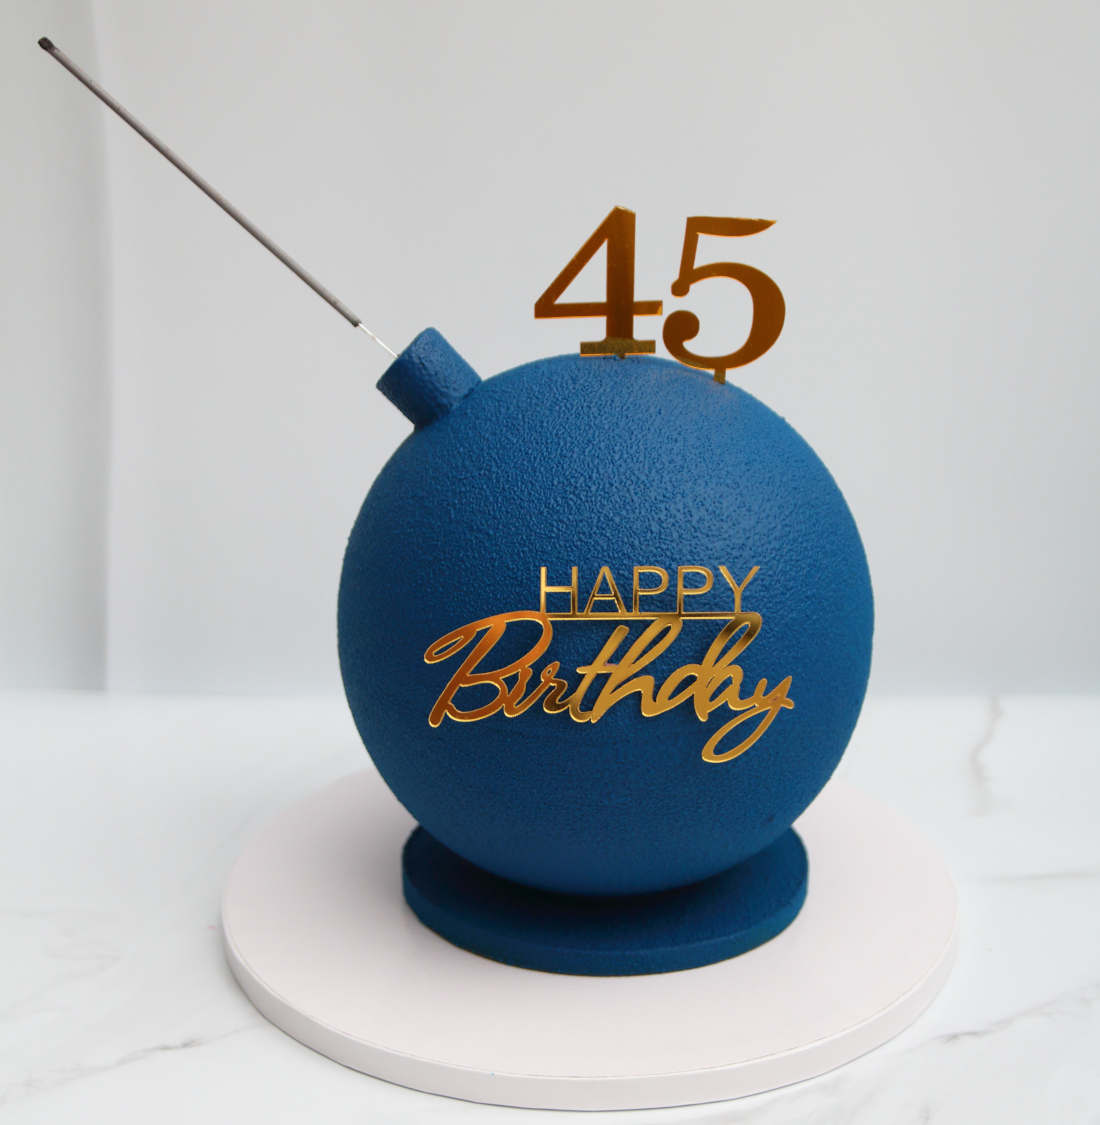 Age on a birthday bomb cake - 45 years old